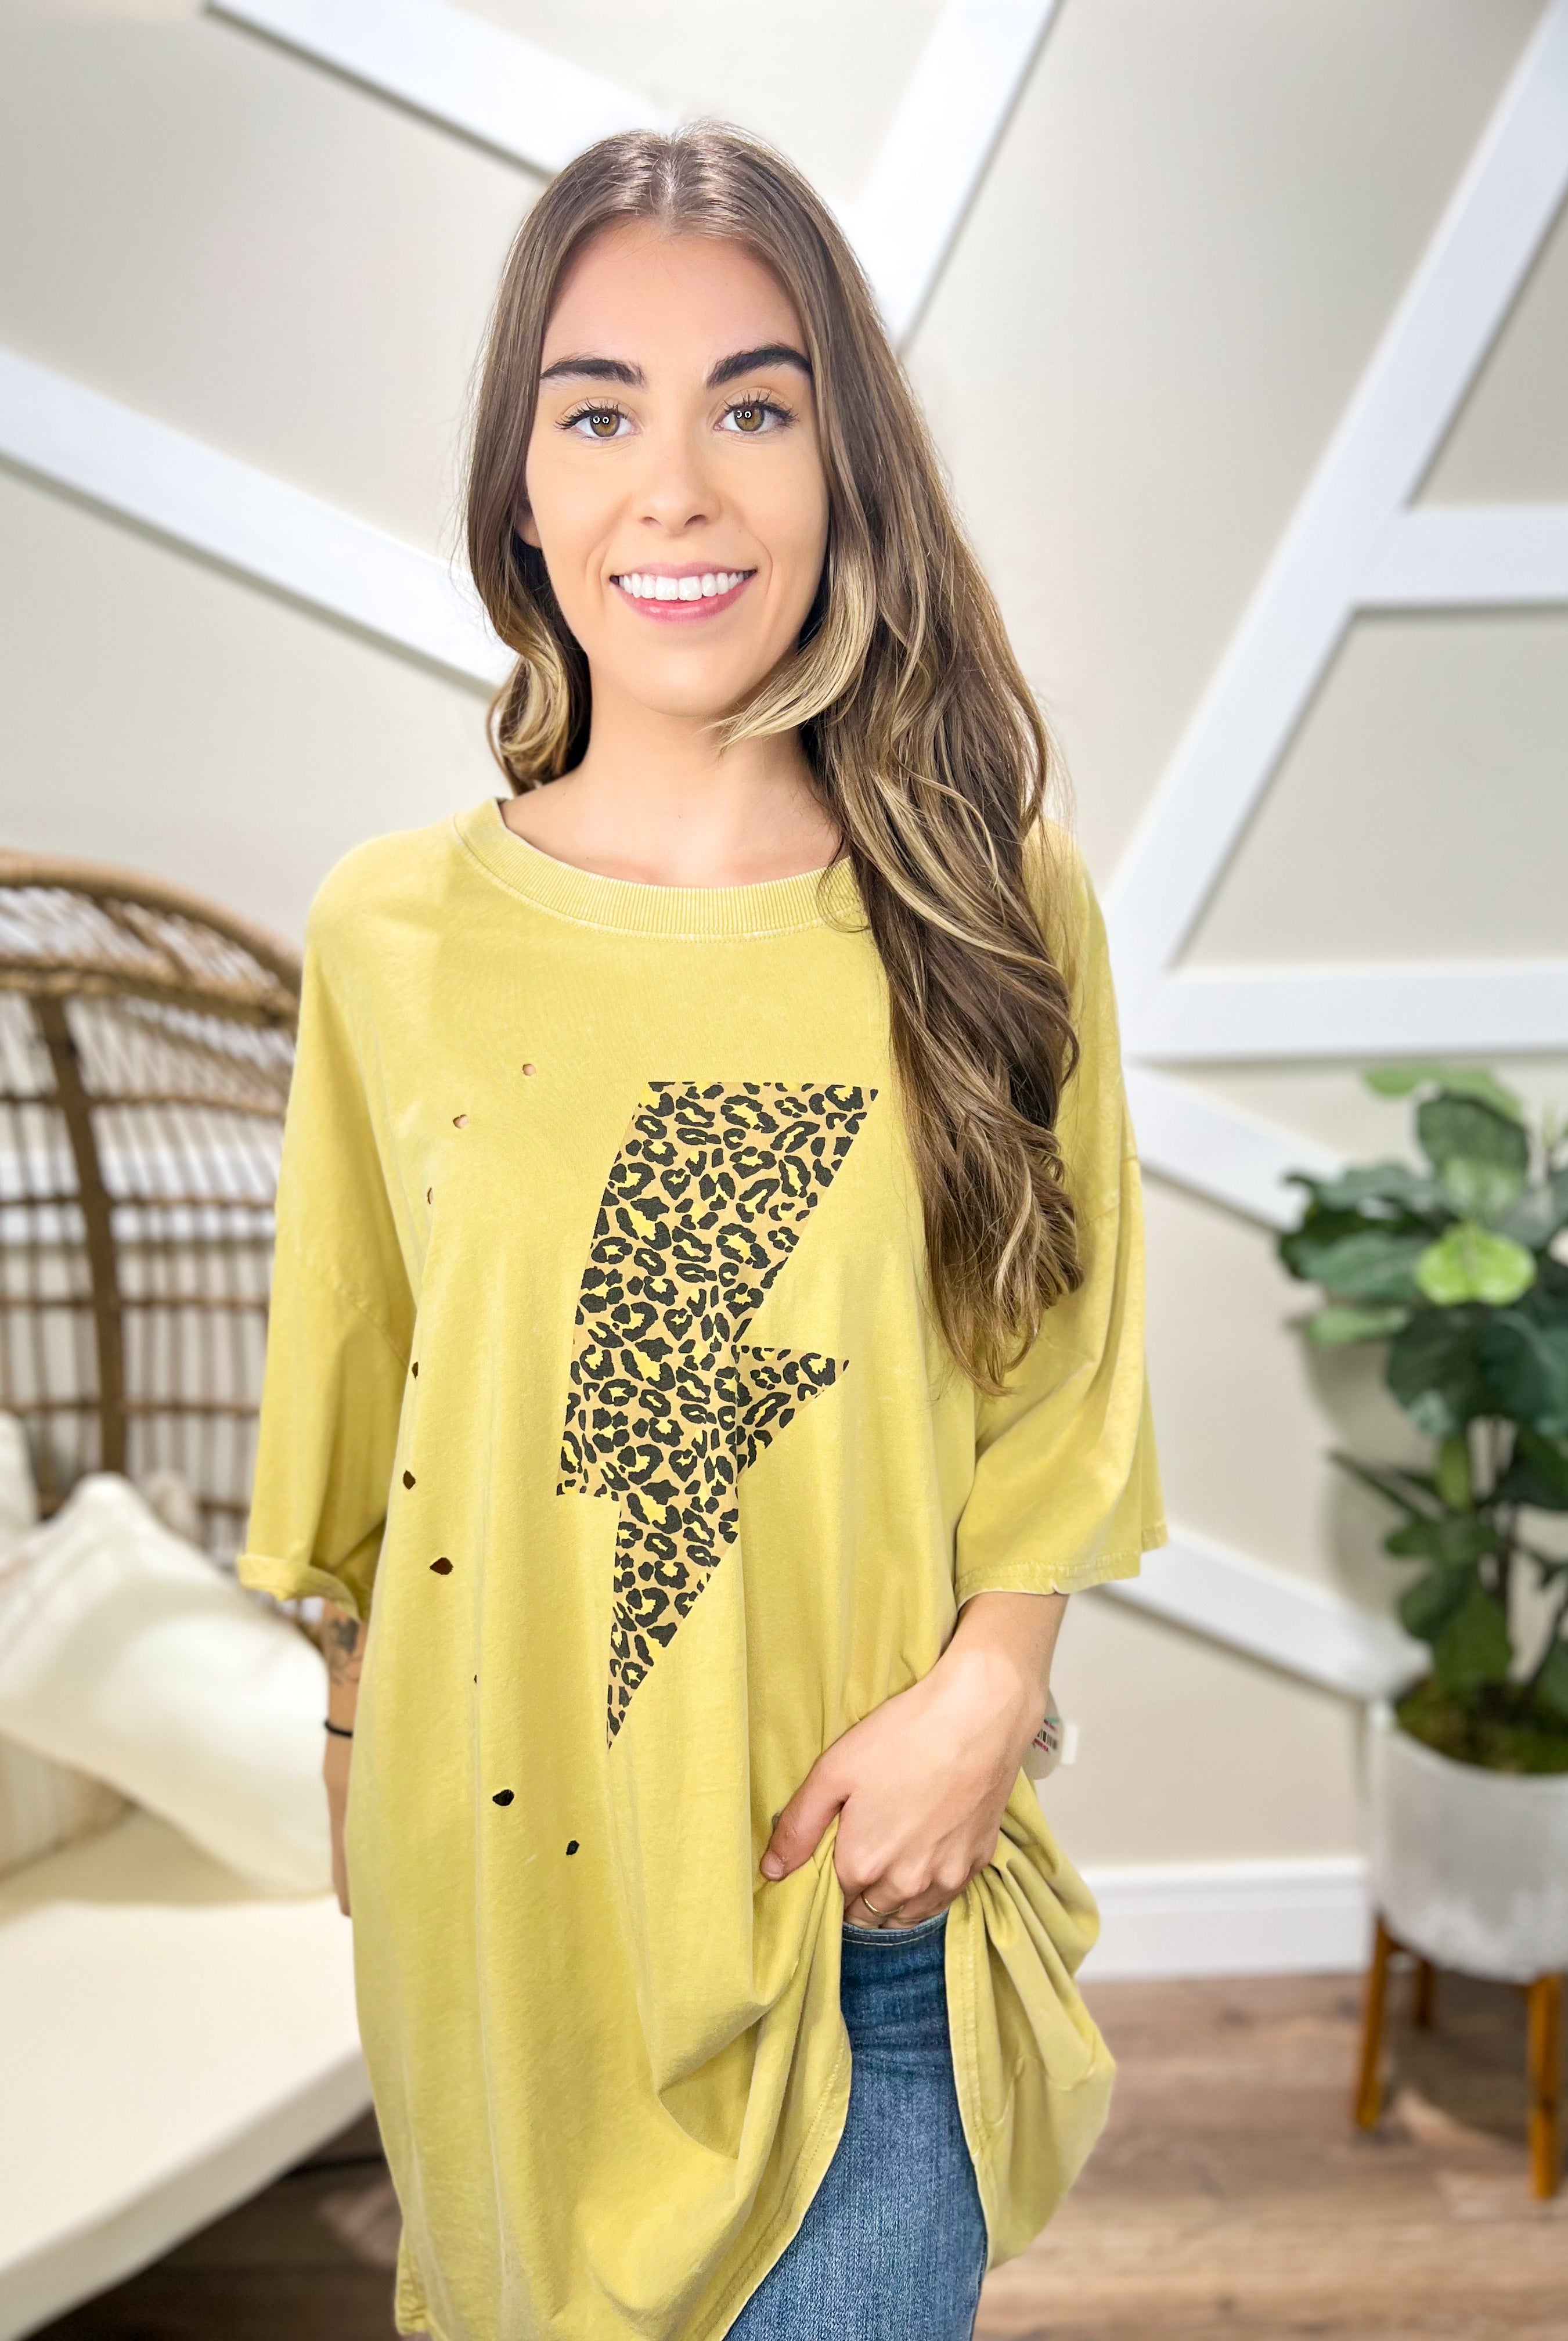 Restock: Strike Twice Graphic Tee-130 Graphic Tees-Easel-Heathered Boho Boutique, Women's Fashion and Accessories in Palmetto, FL